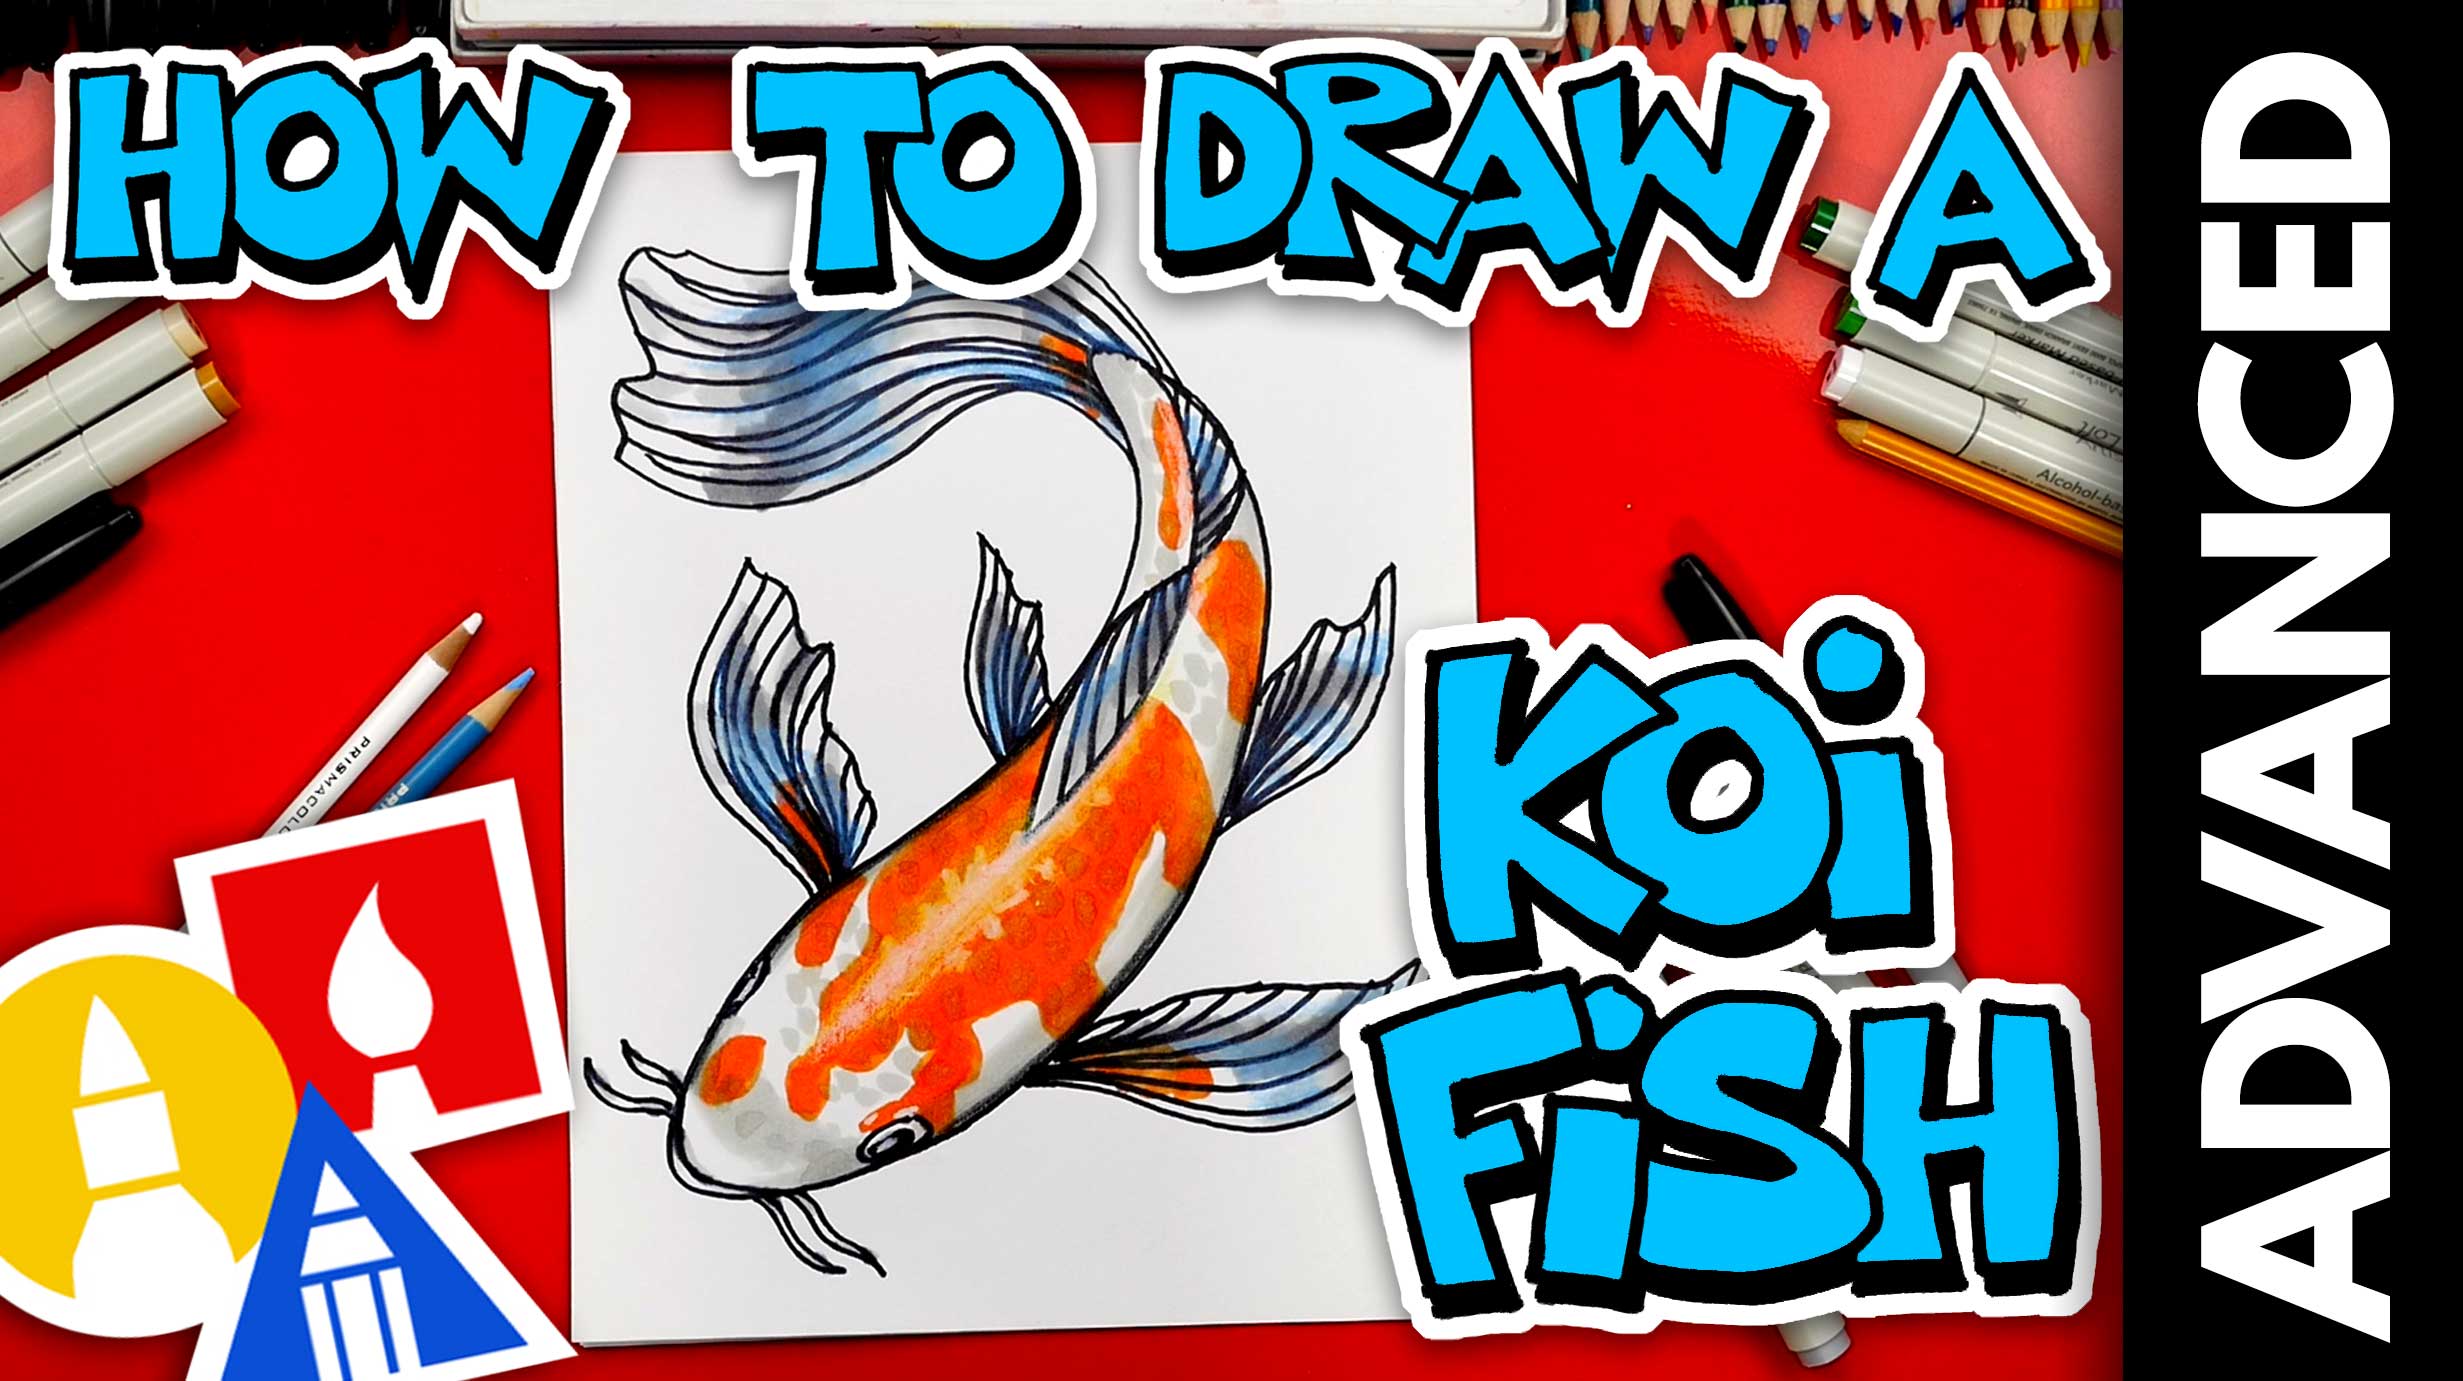 https://artforkidshub.com/wp-content/uploads/2019/09/How-To-Draw-A-Koi-Fish-Advanced-13-and-UP-thumbnail.jpg